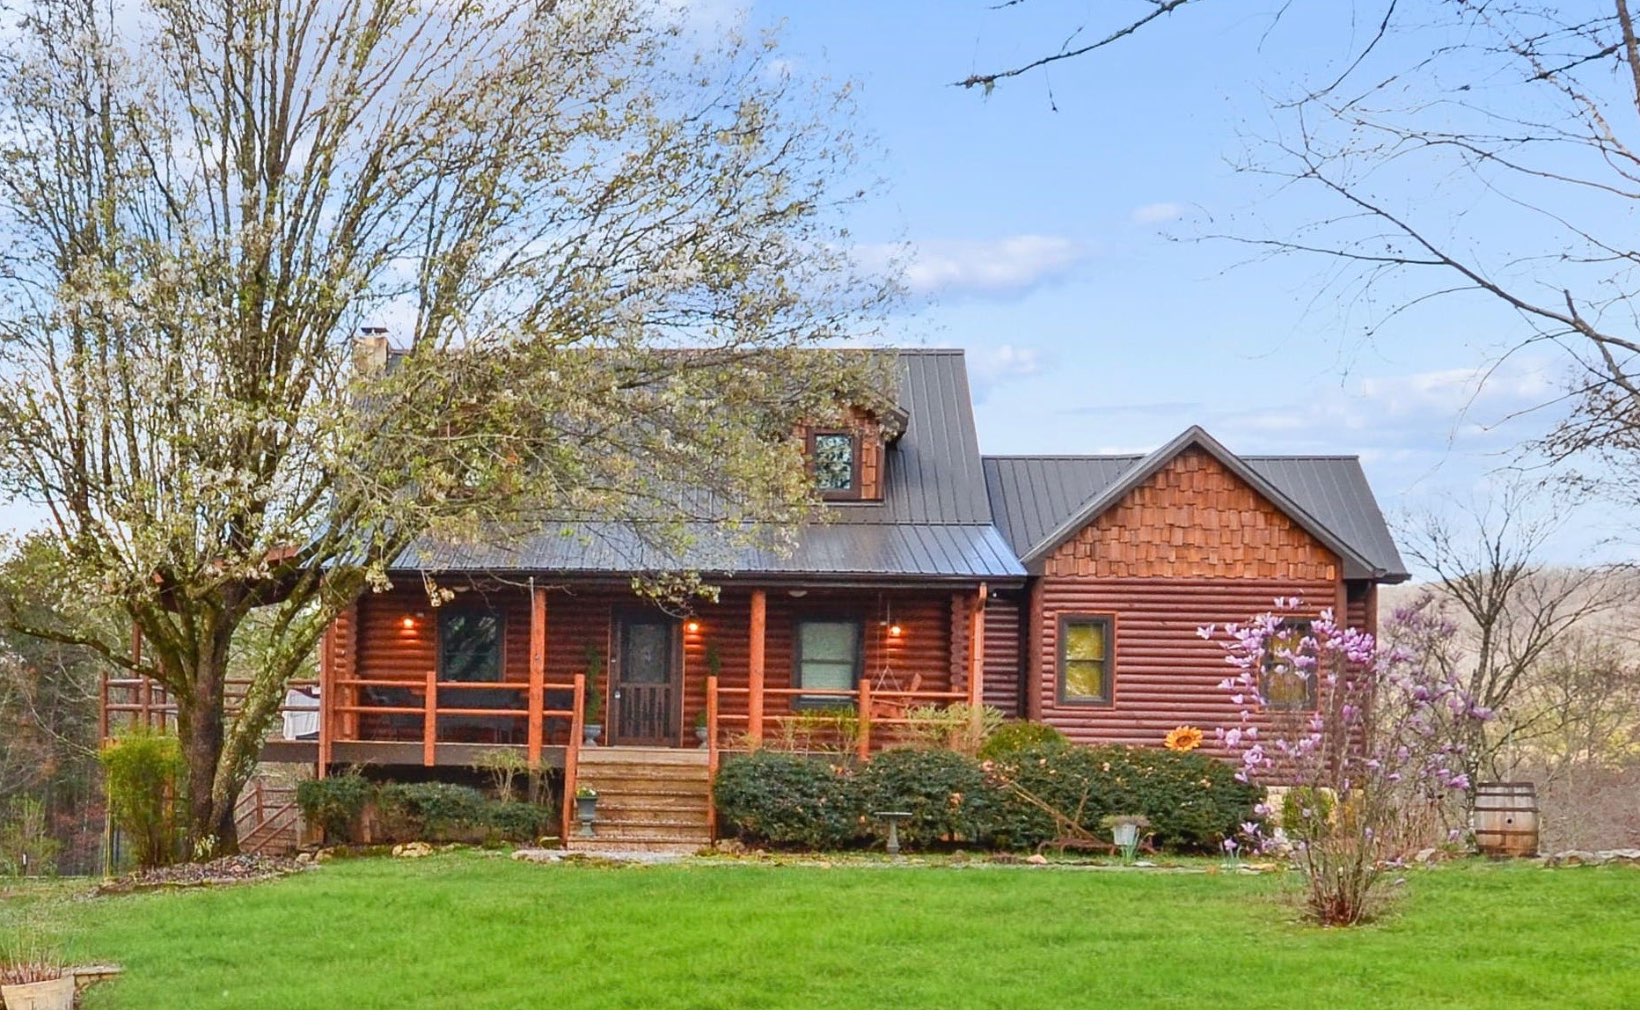 This fully renovated rustic lodge with 4 BR and 3 1/2 baths, a state-of-the-art horse farm, and 5 star fully furnished barnominium vacation rental (with income of $30K+) has it all with pasture and long range views from both properties! Fall in love w/ the lodge style living room w/ vaulted ceiling, wood accents, antler chandelier, branch railing, & masonry fireplace. The cabin also features a spacious kitchen w/ exterior deck overlooking the farm, a perfectly planned master bedroom, dream closet, master bath w/ gorgeous petrified wood & flagstone floors, an upstairs loft w/office space, a sleeping nook, and an additional bedroom with bath. The basement includes an additional family room and 2 bedrooms. There is also a planting room & stone patio w/ fire pit. Bring all the animals, as this property is complete w/ a 3 stall horse barn, fencing, tack room, outside horse wash, entertaining kitchen, & more. Above the barn is a 1 bed/1 bath open floorpan 5 star vacation rental fully furnished. Extra bath in lower barn. Would also make a great guest house or additional living space!